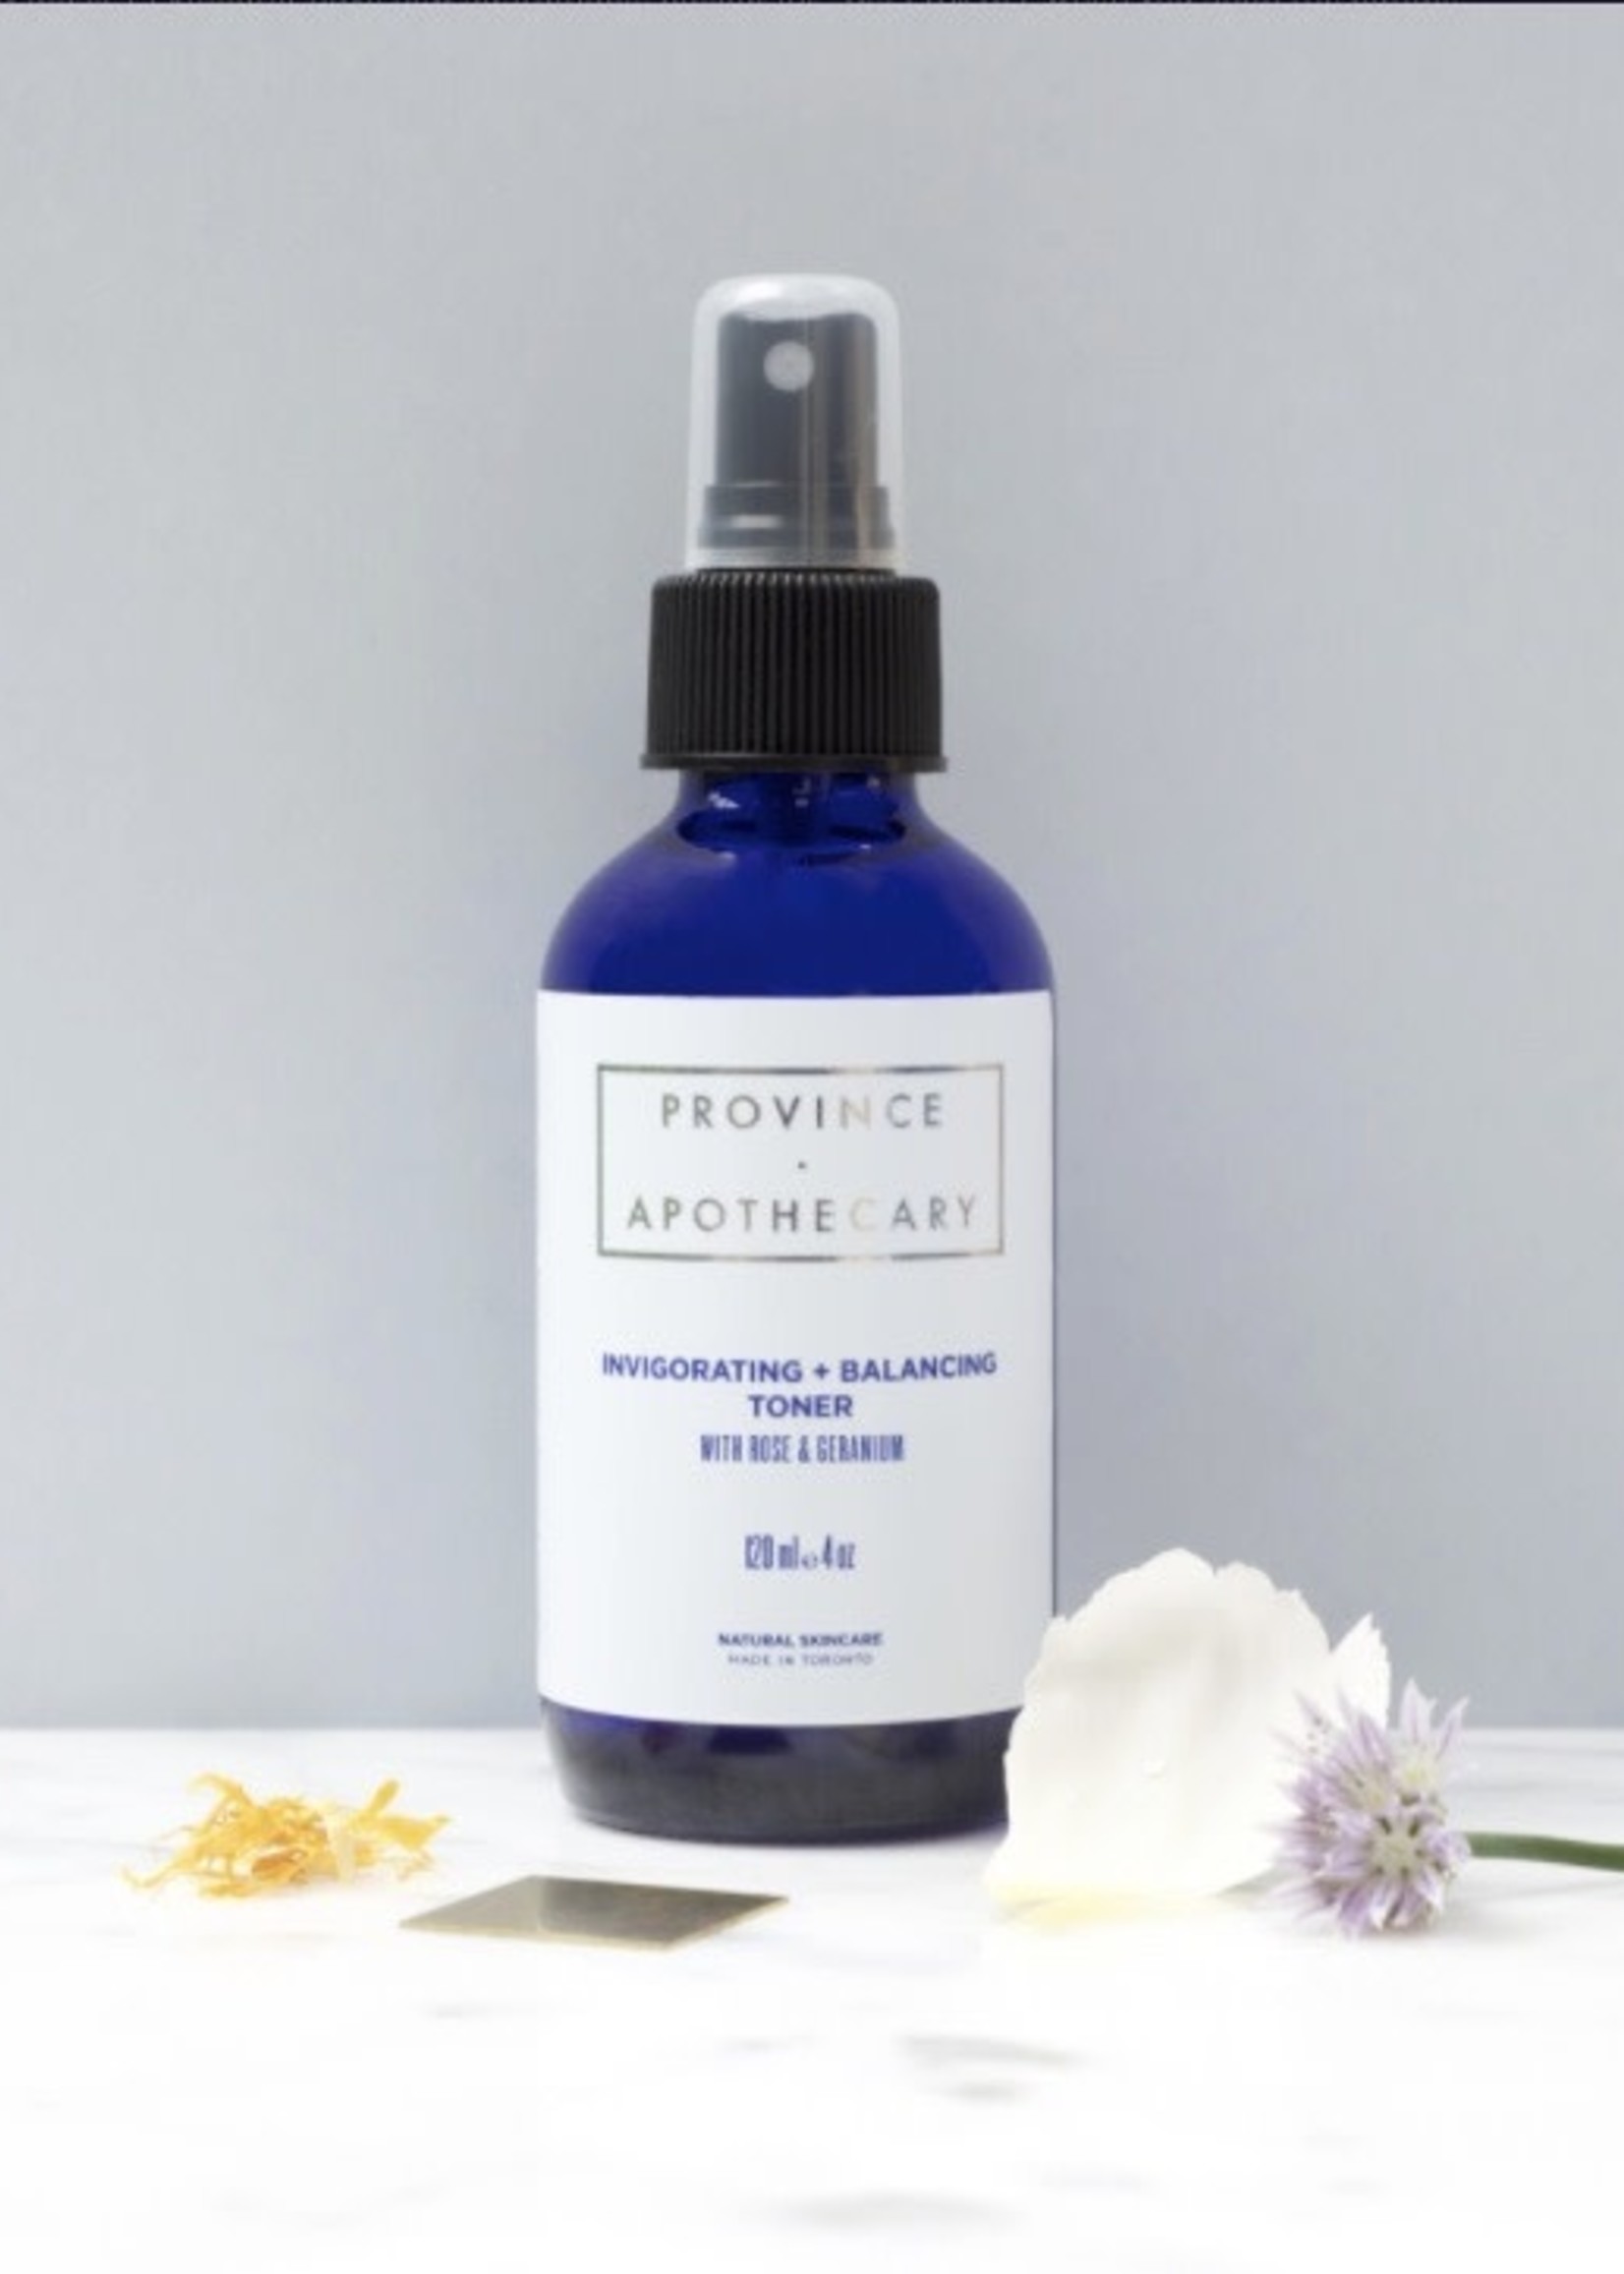 Province Apothecary Province Apothecary Toner